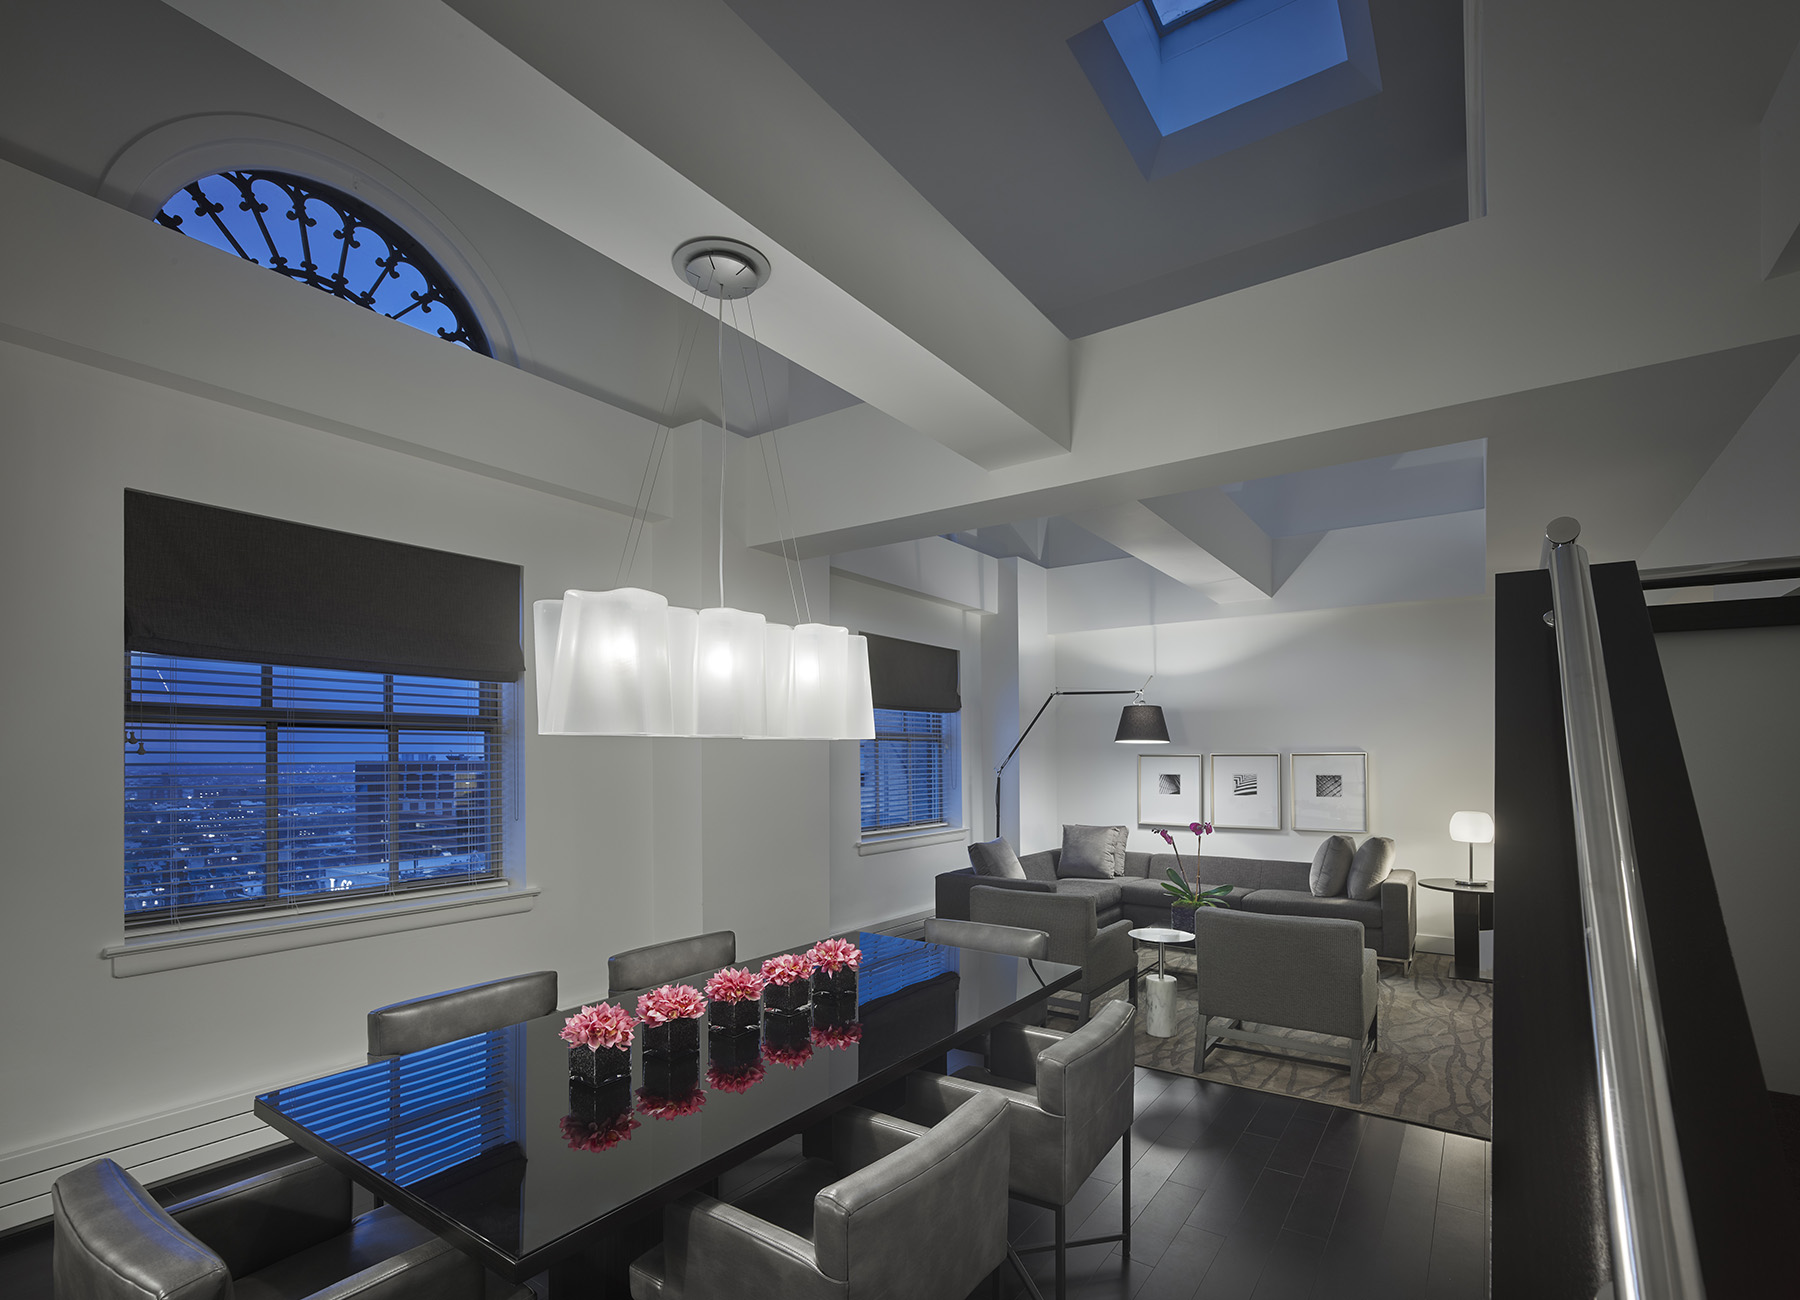 Philadelphia penthouse lounge with modern black and gray dining table for 8, stairs to second level, and arched windows showing dusk sky